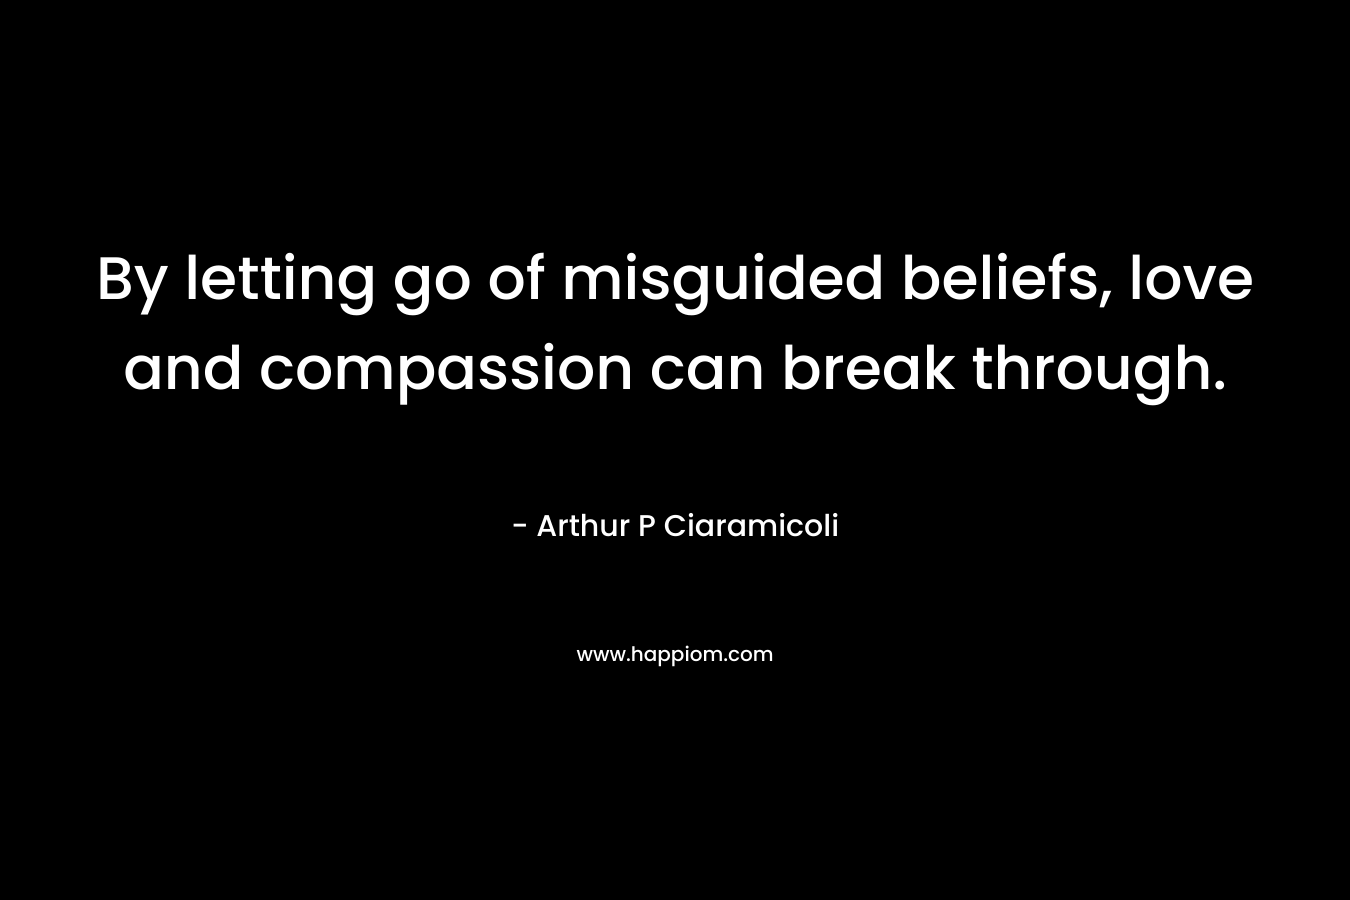 By letting go of misguided beliefs, love and compassion can break through.